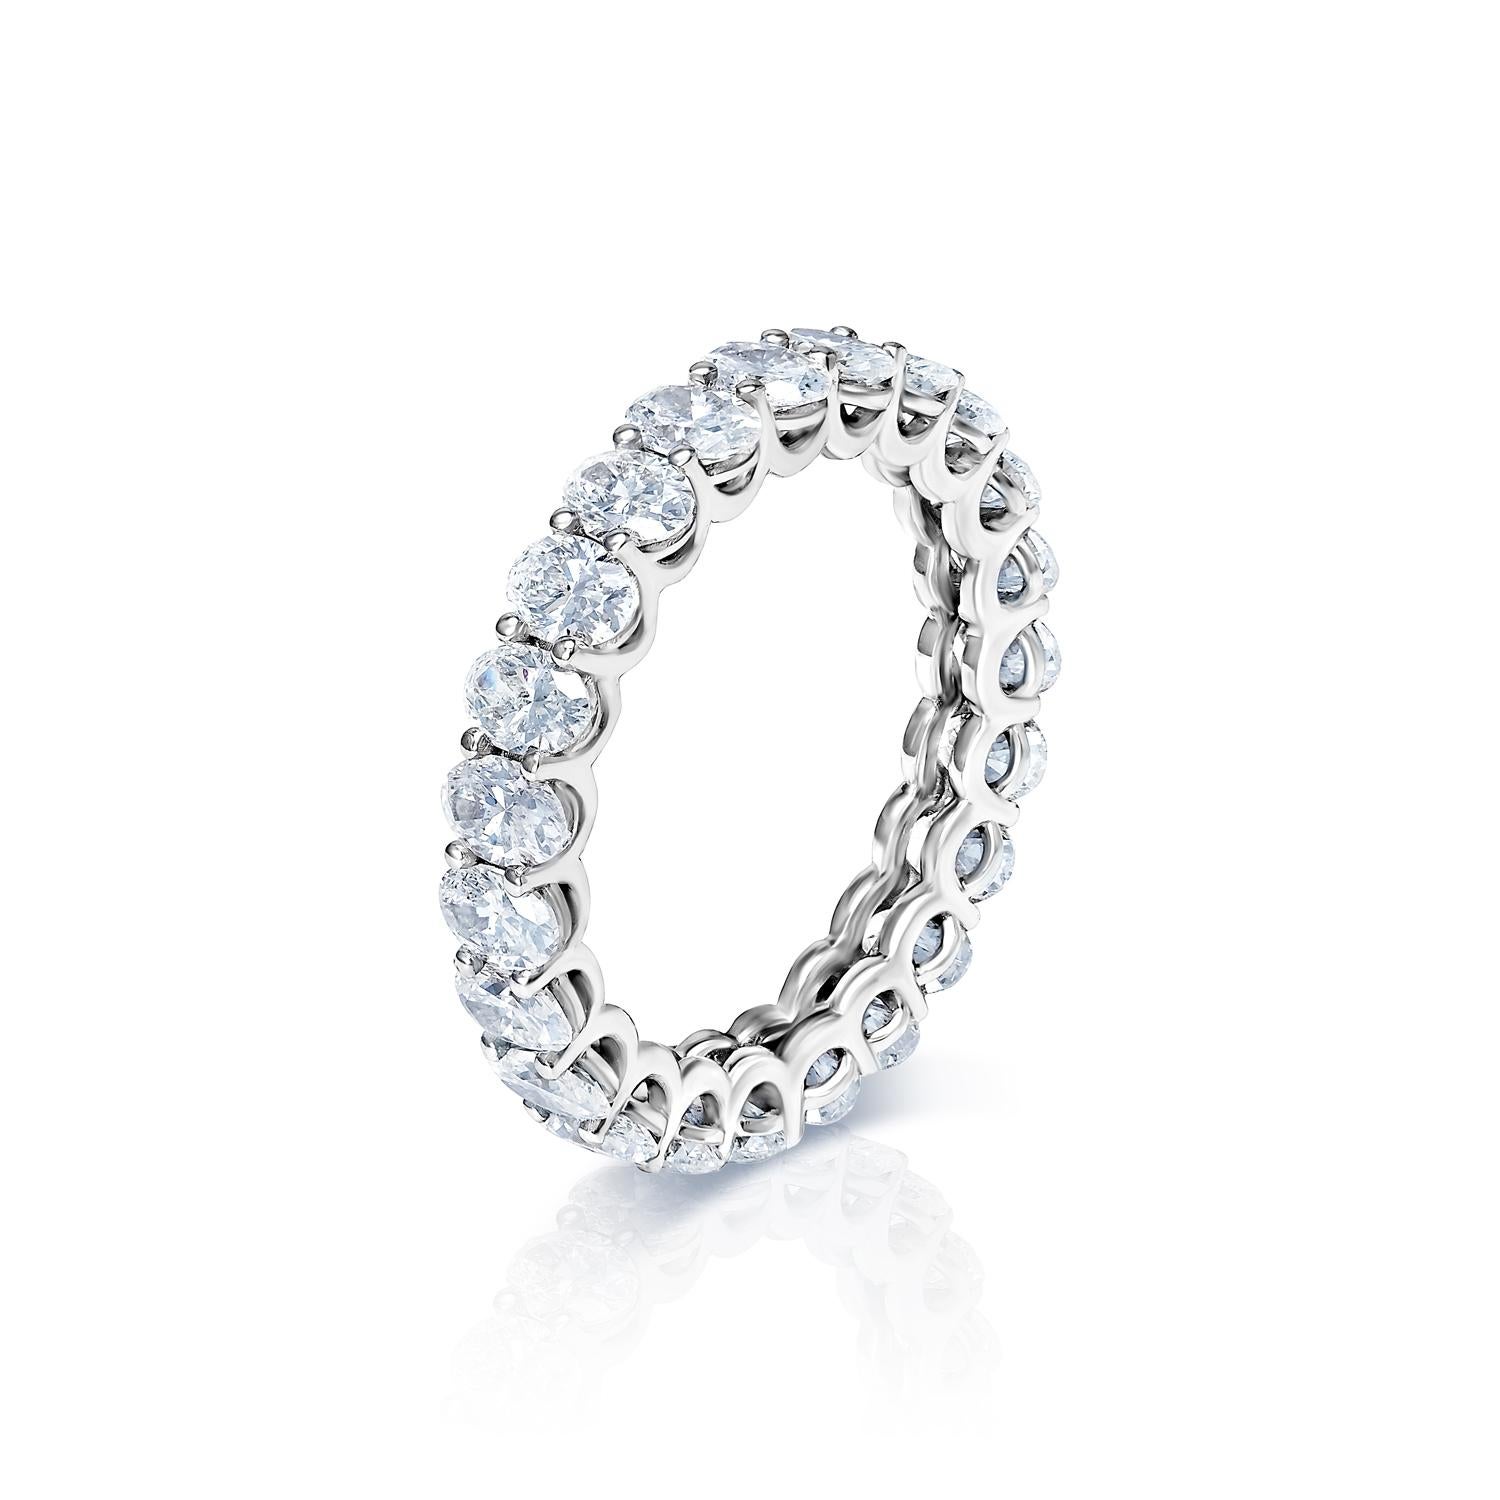 Earth Mined Diamonds:
Carat Weight: 4.48 Carats
Style: Oval Cut

Ring:
Total Carats: 4.48 Carats
Metal: 14 karat White Gold
Setting: U-shape shared prong
Size: Can be adjusted to any size